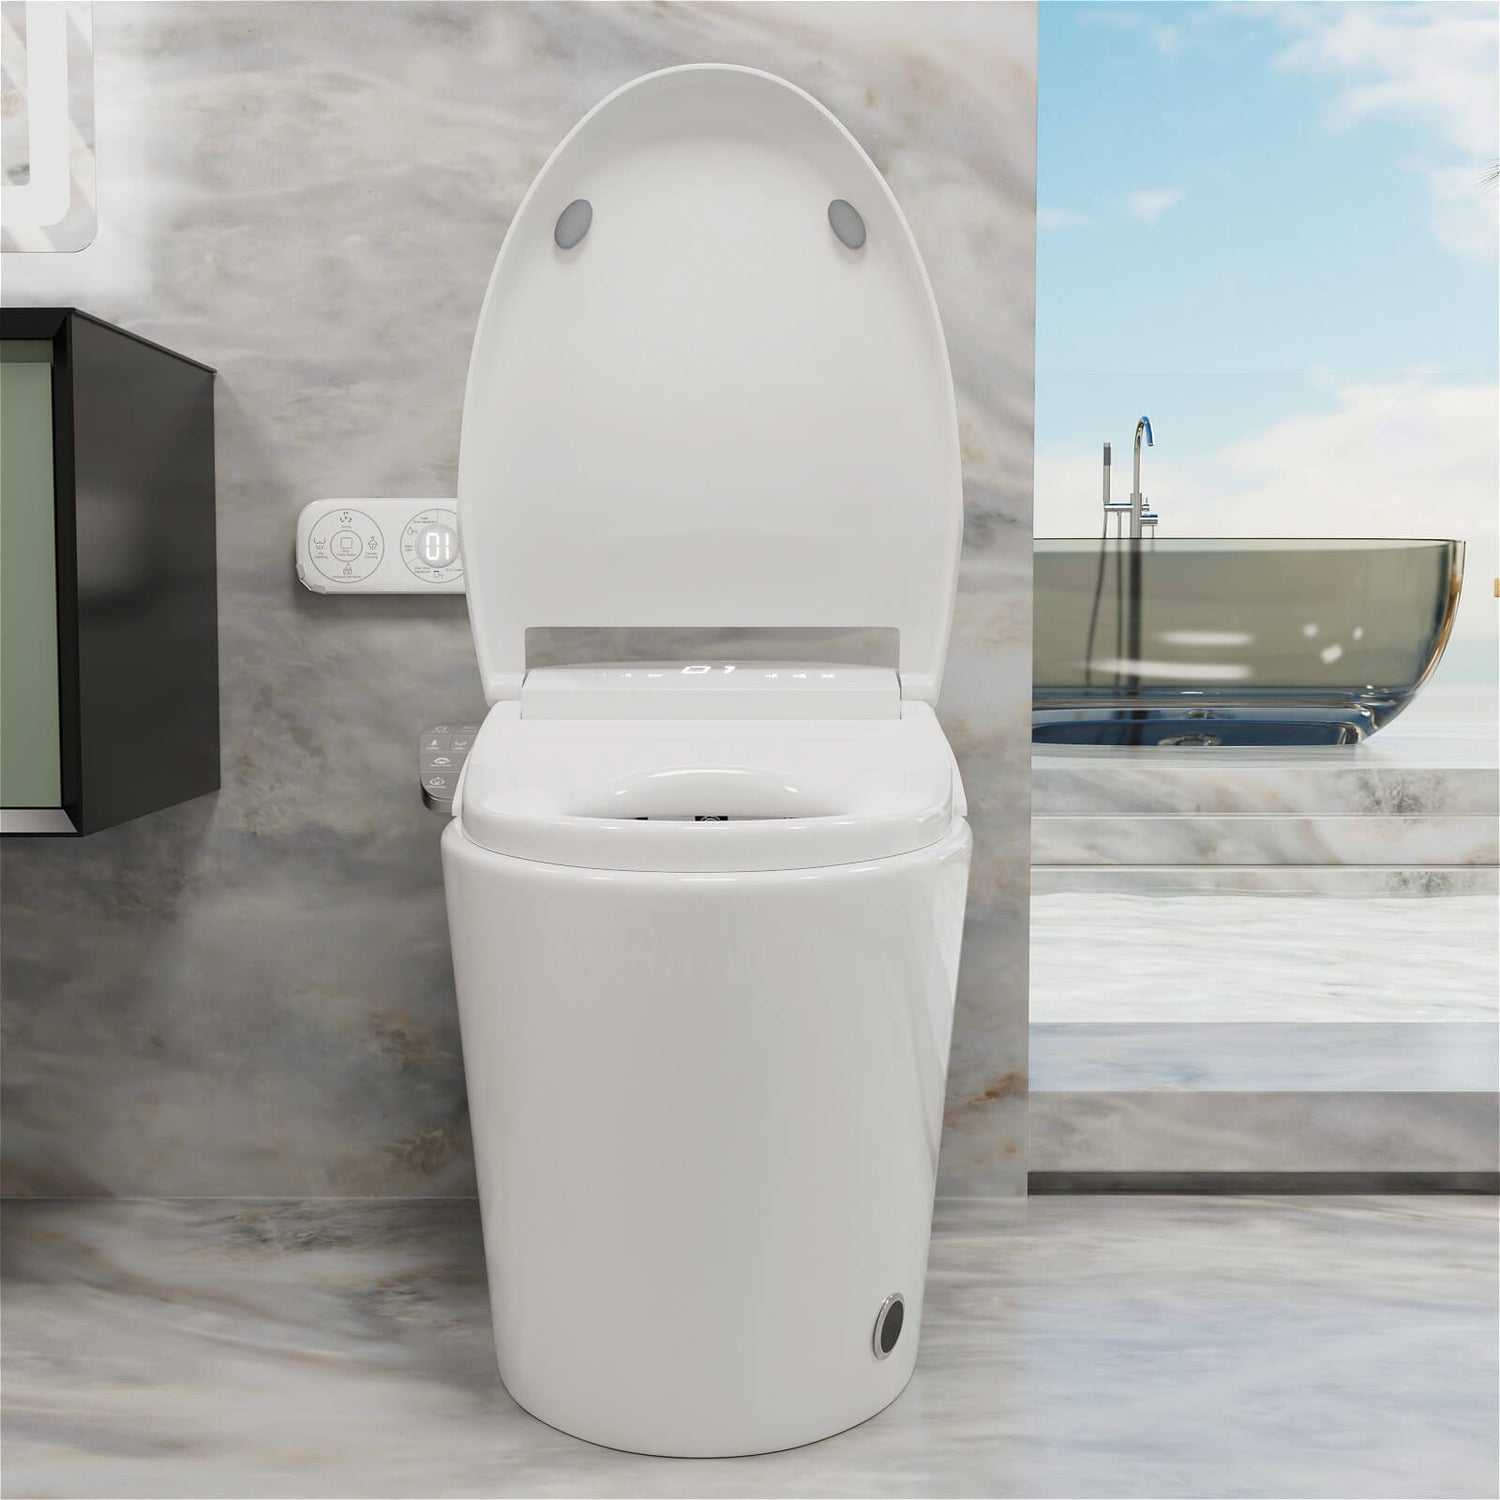 Smart Bidet Toilet with Remote Control, One Piece Tankless, Heated Seat, Elderly Mode and Child Mode